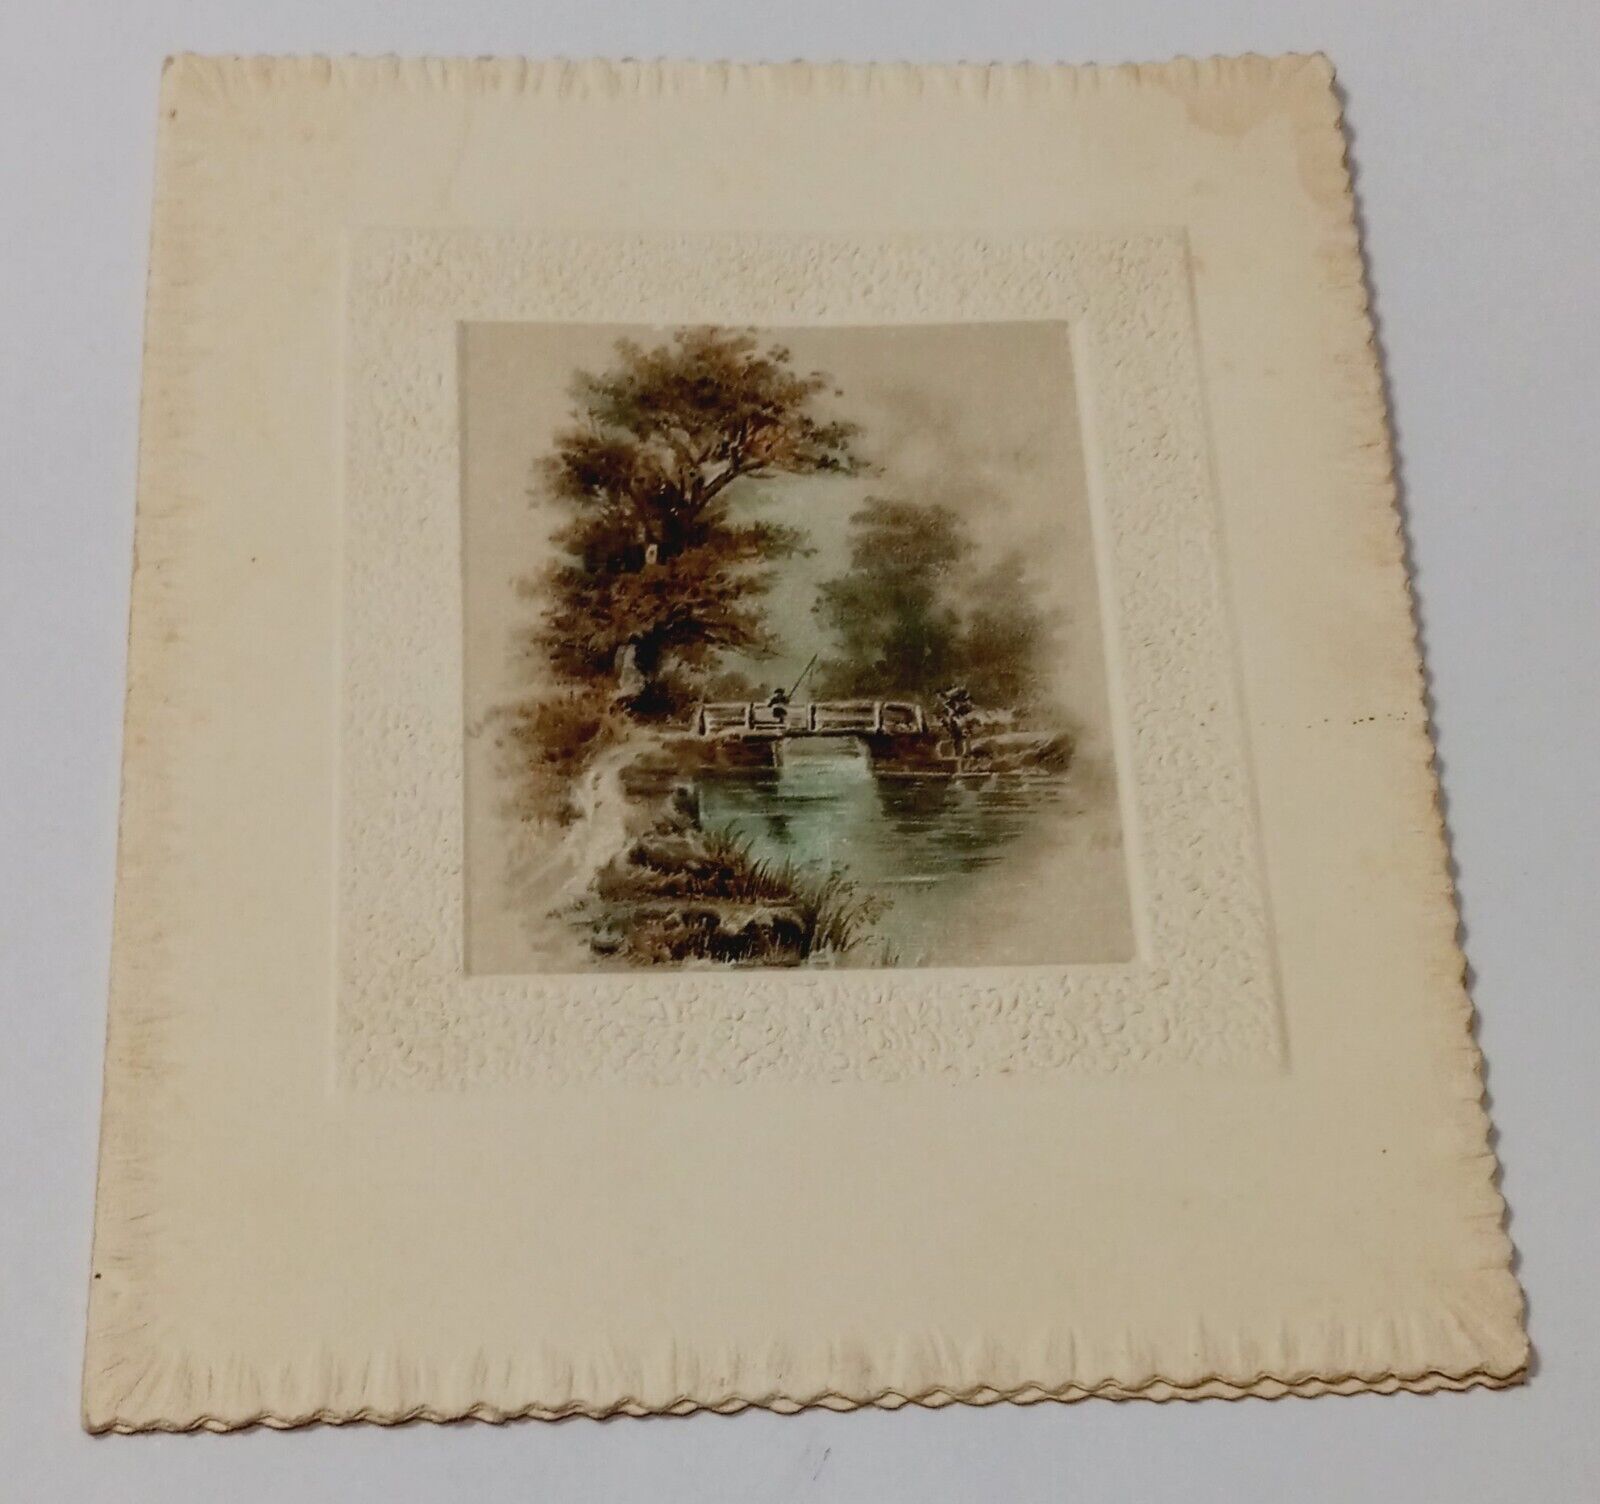 VICTORIAN ANTIQUE GREETING CARD WISHES HAPPY NEW YEAR FISHING OFF BRIDGE PICTURE